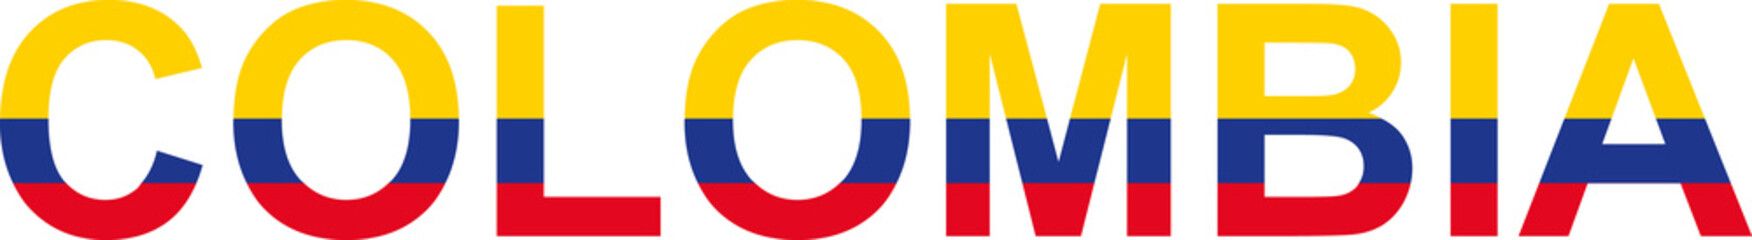 Colombia word in flag style